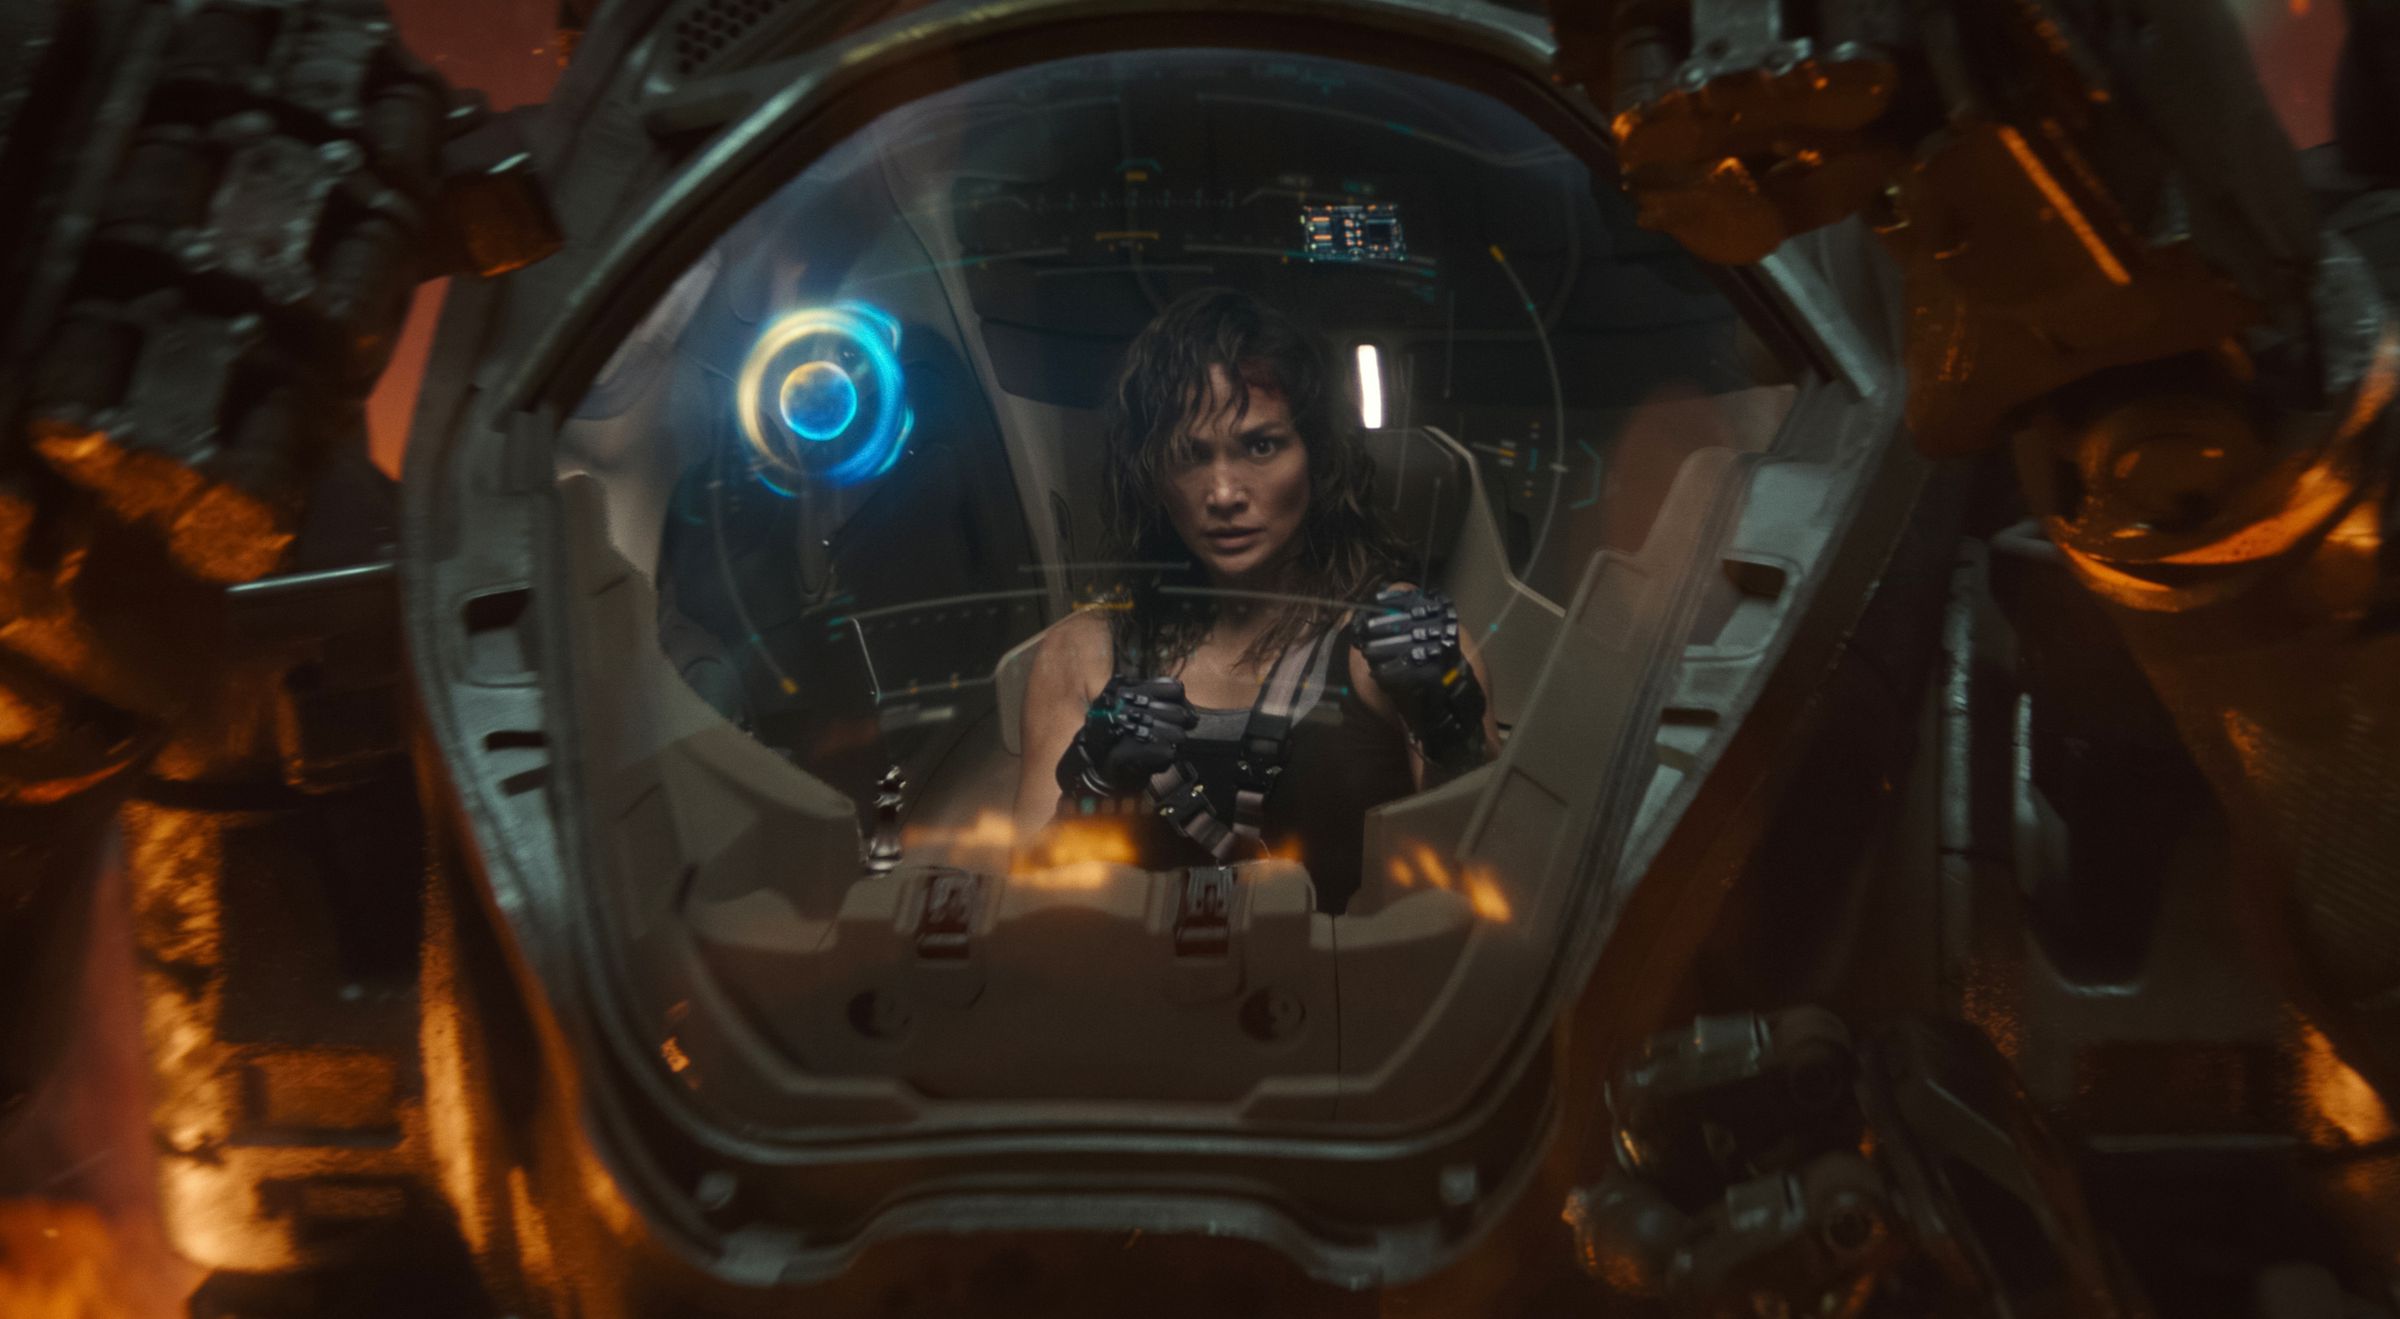 Even J.Lo in a mech suit can’t save Netflix’s by-the-numbers AI thriller